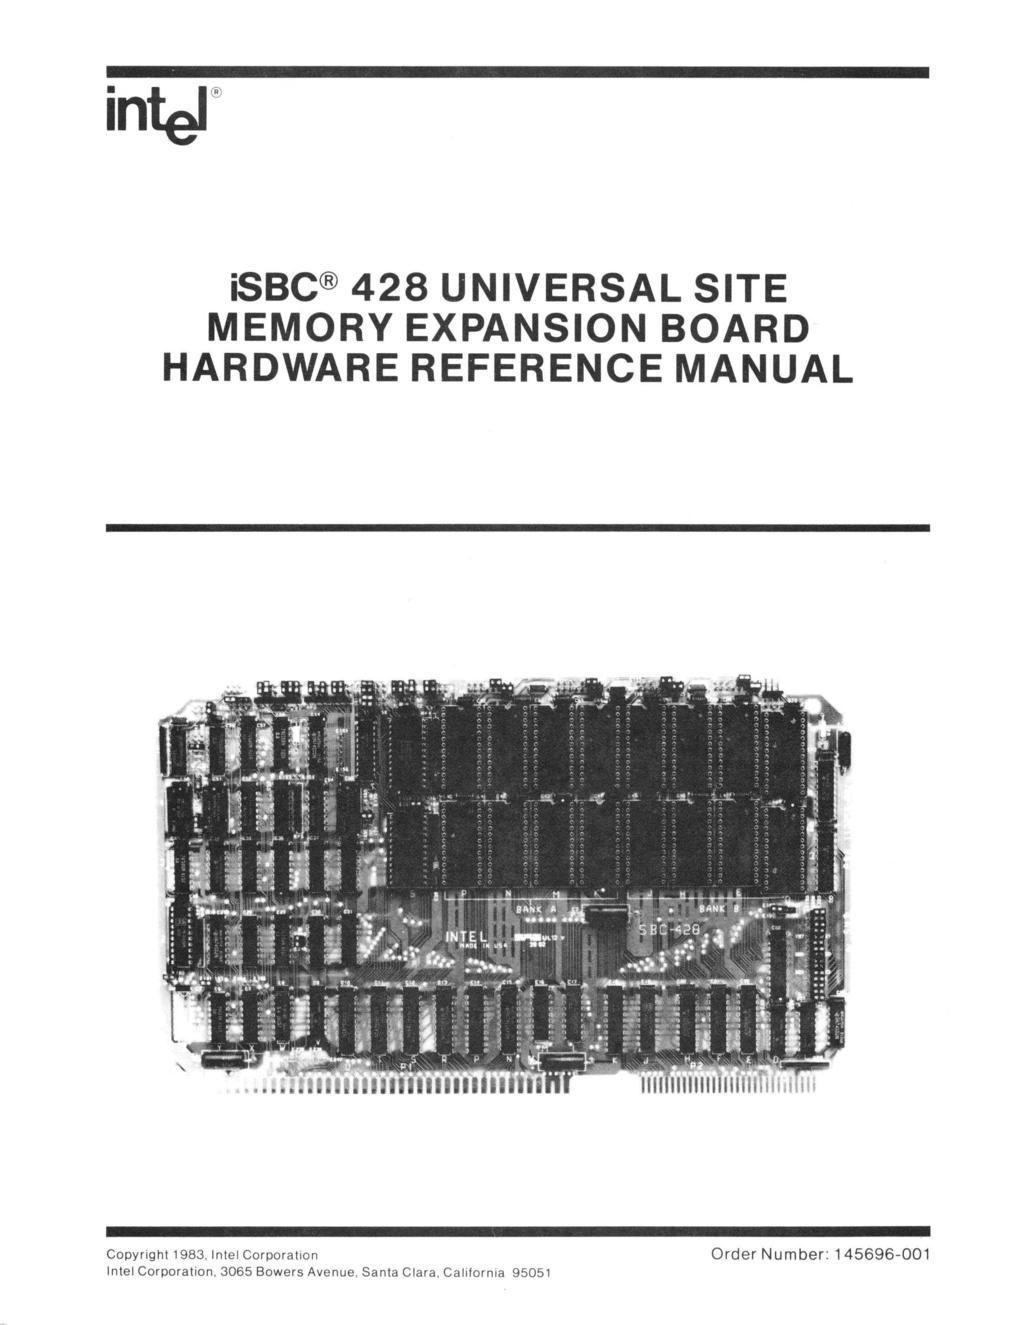 isbc 428 UNIVERSAL SITE MEMORY EXPANSION BOARD HARDWARE REFERENCE MANUAL Copyright 1983, Intel